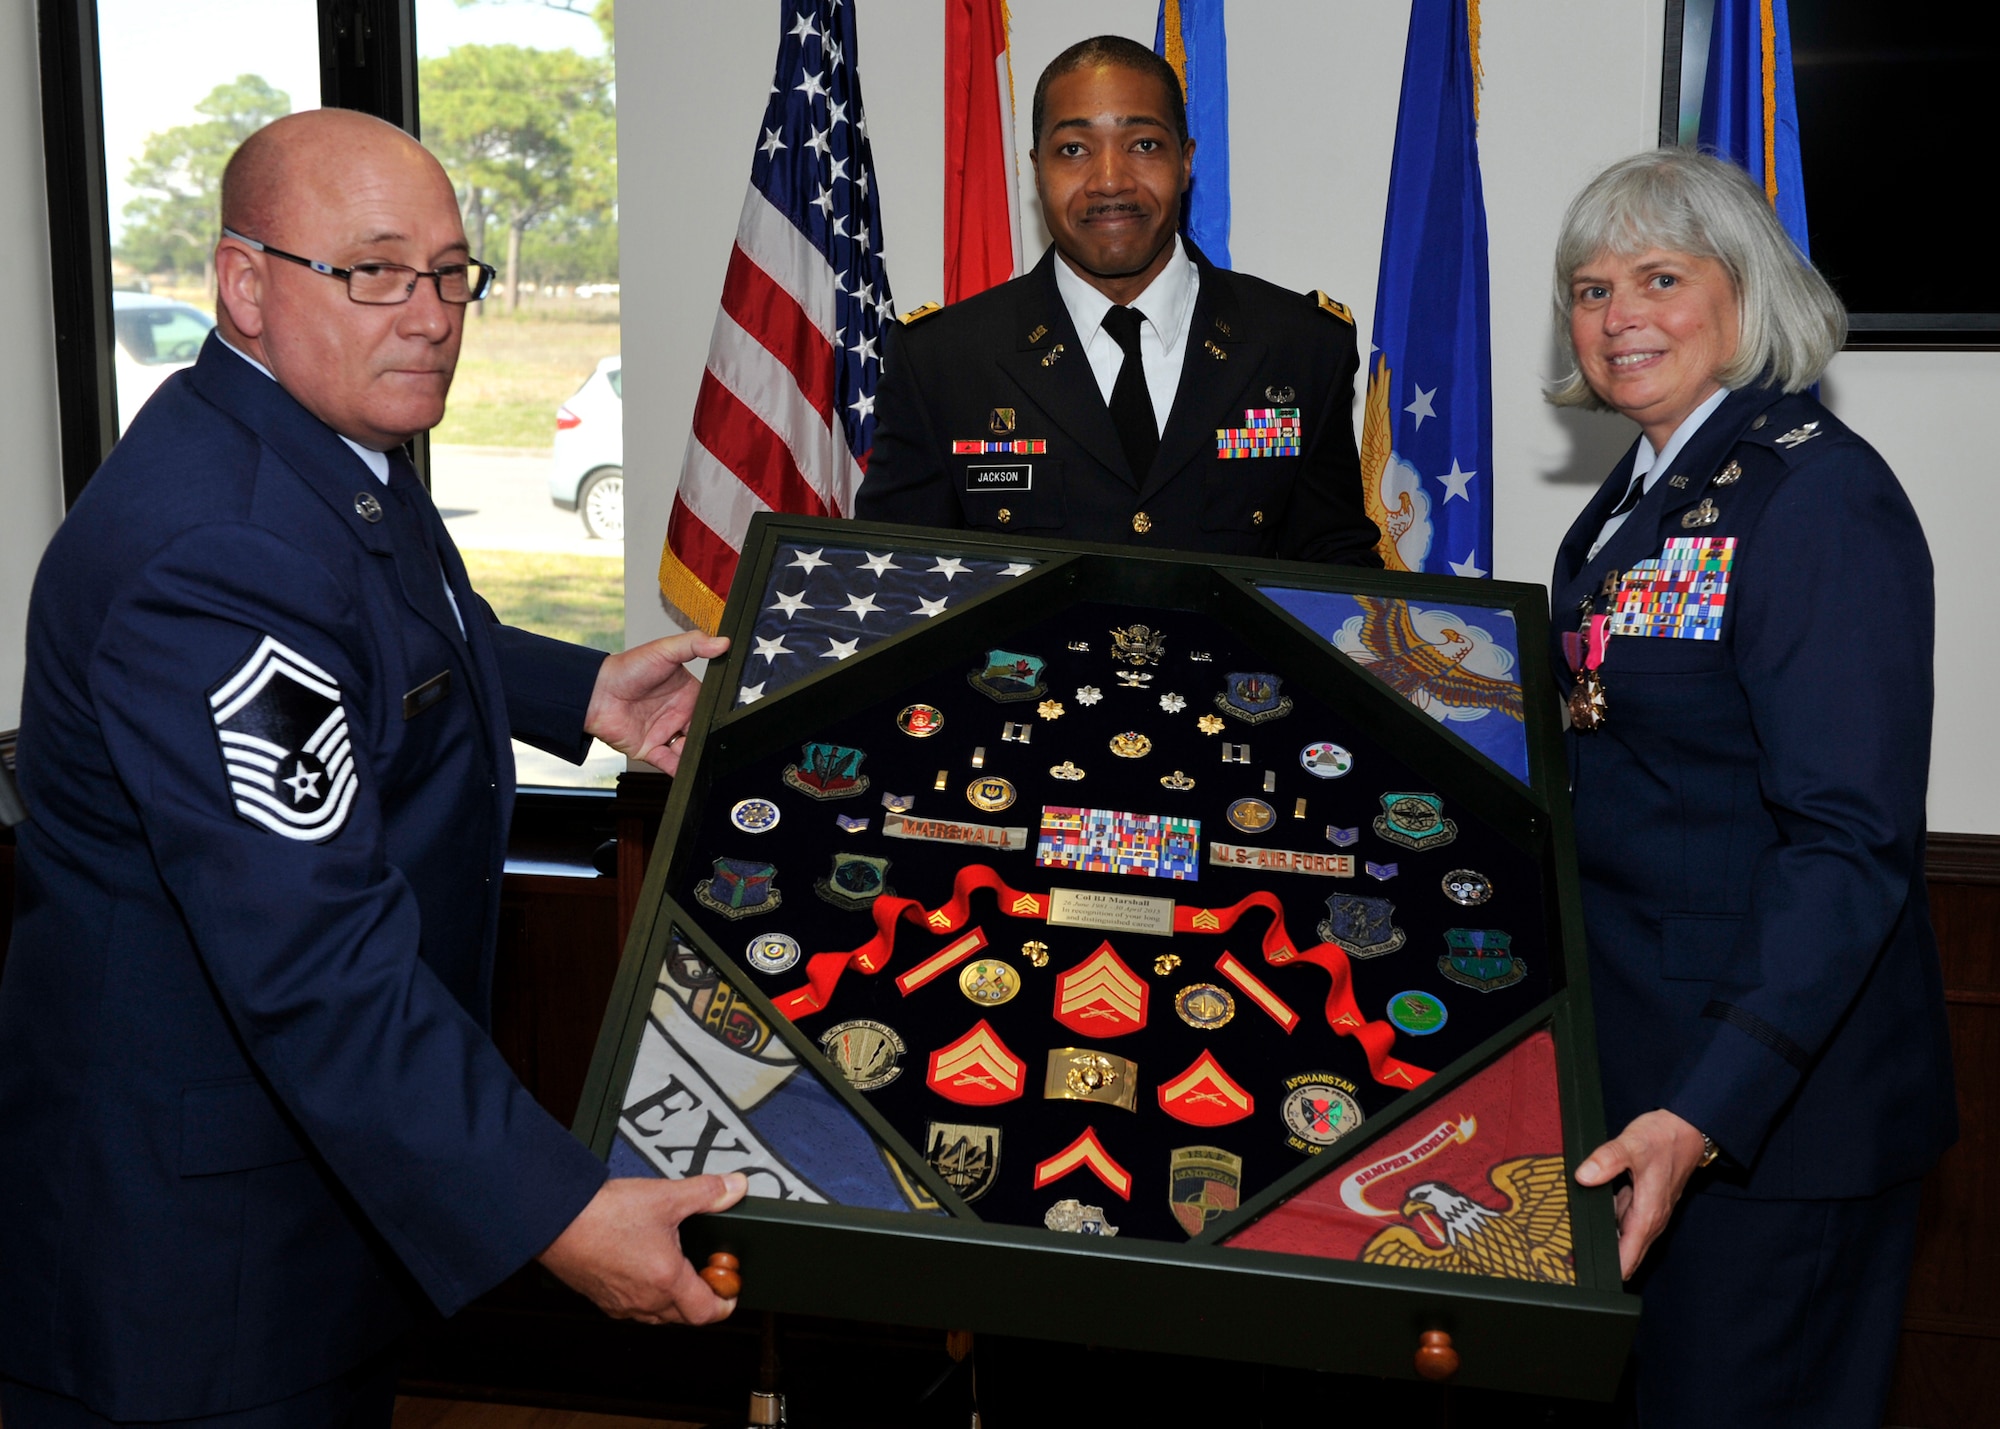 From the Continental U.S. NORAD Region-1st AF (Air Forces Northern)’s Installations & Mission Support Directorate, (A7), Senior Master Sgt. Charles Stoyer IV, Maj. Vincent Jackson and Col. “BJ” Marshall, display the shadow box she received to recognize her retirement following a 34-year military career that included the U.S. Marine Corps. Prior to her retirement, Marshall served as the A7 Director. (U.S. Air Force photo by Airman 1st Class Sergio Gamboa/Released)